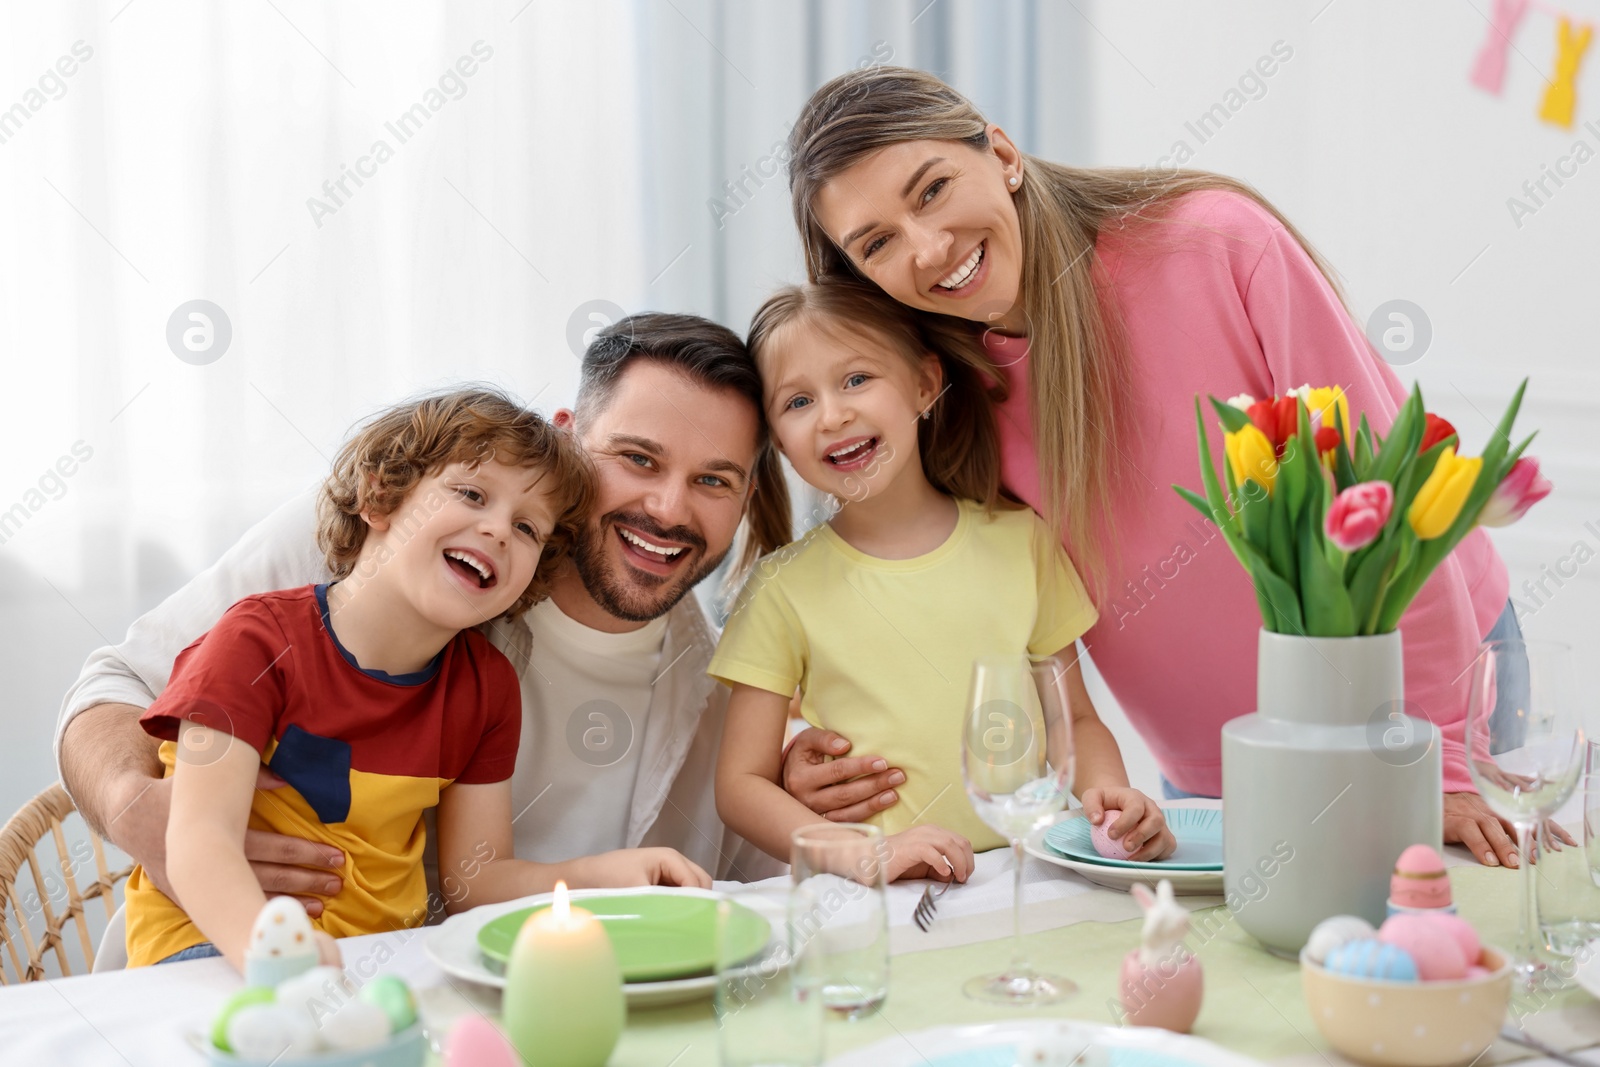 Photo of Easter celebration. Portrait of happy family at served table in room